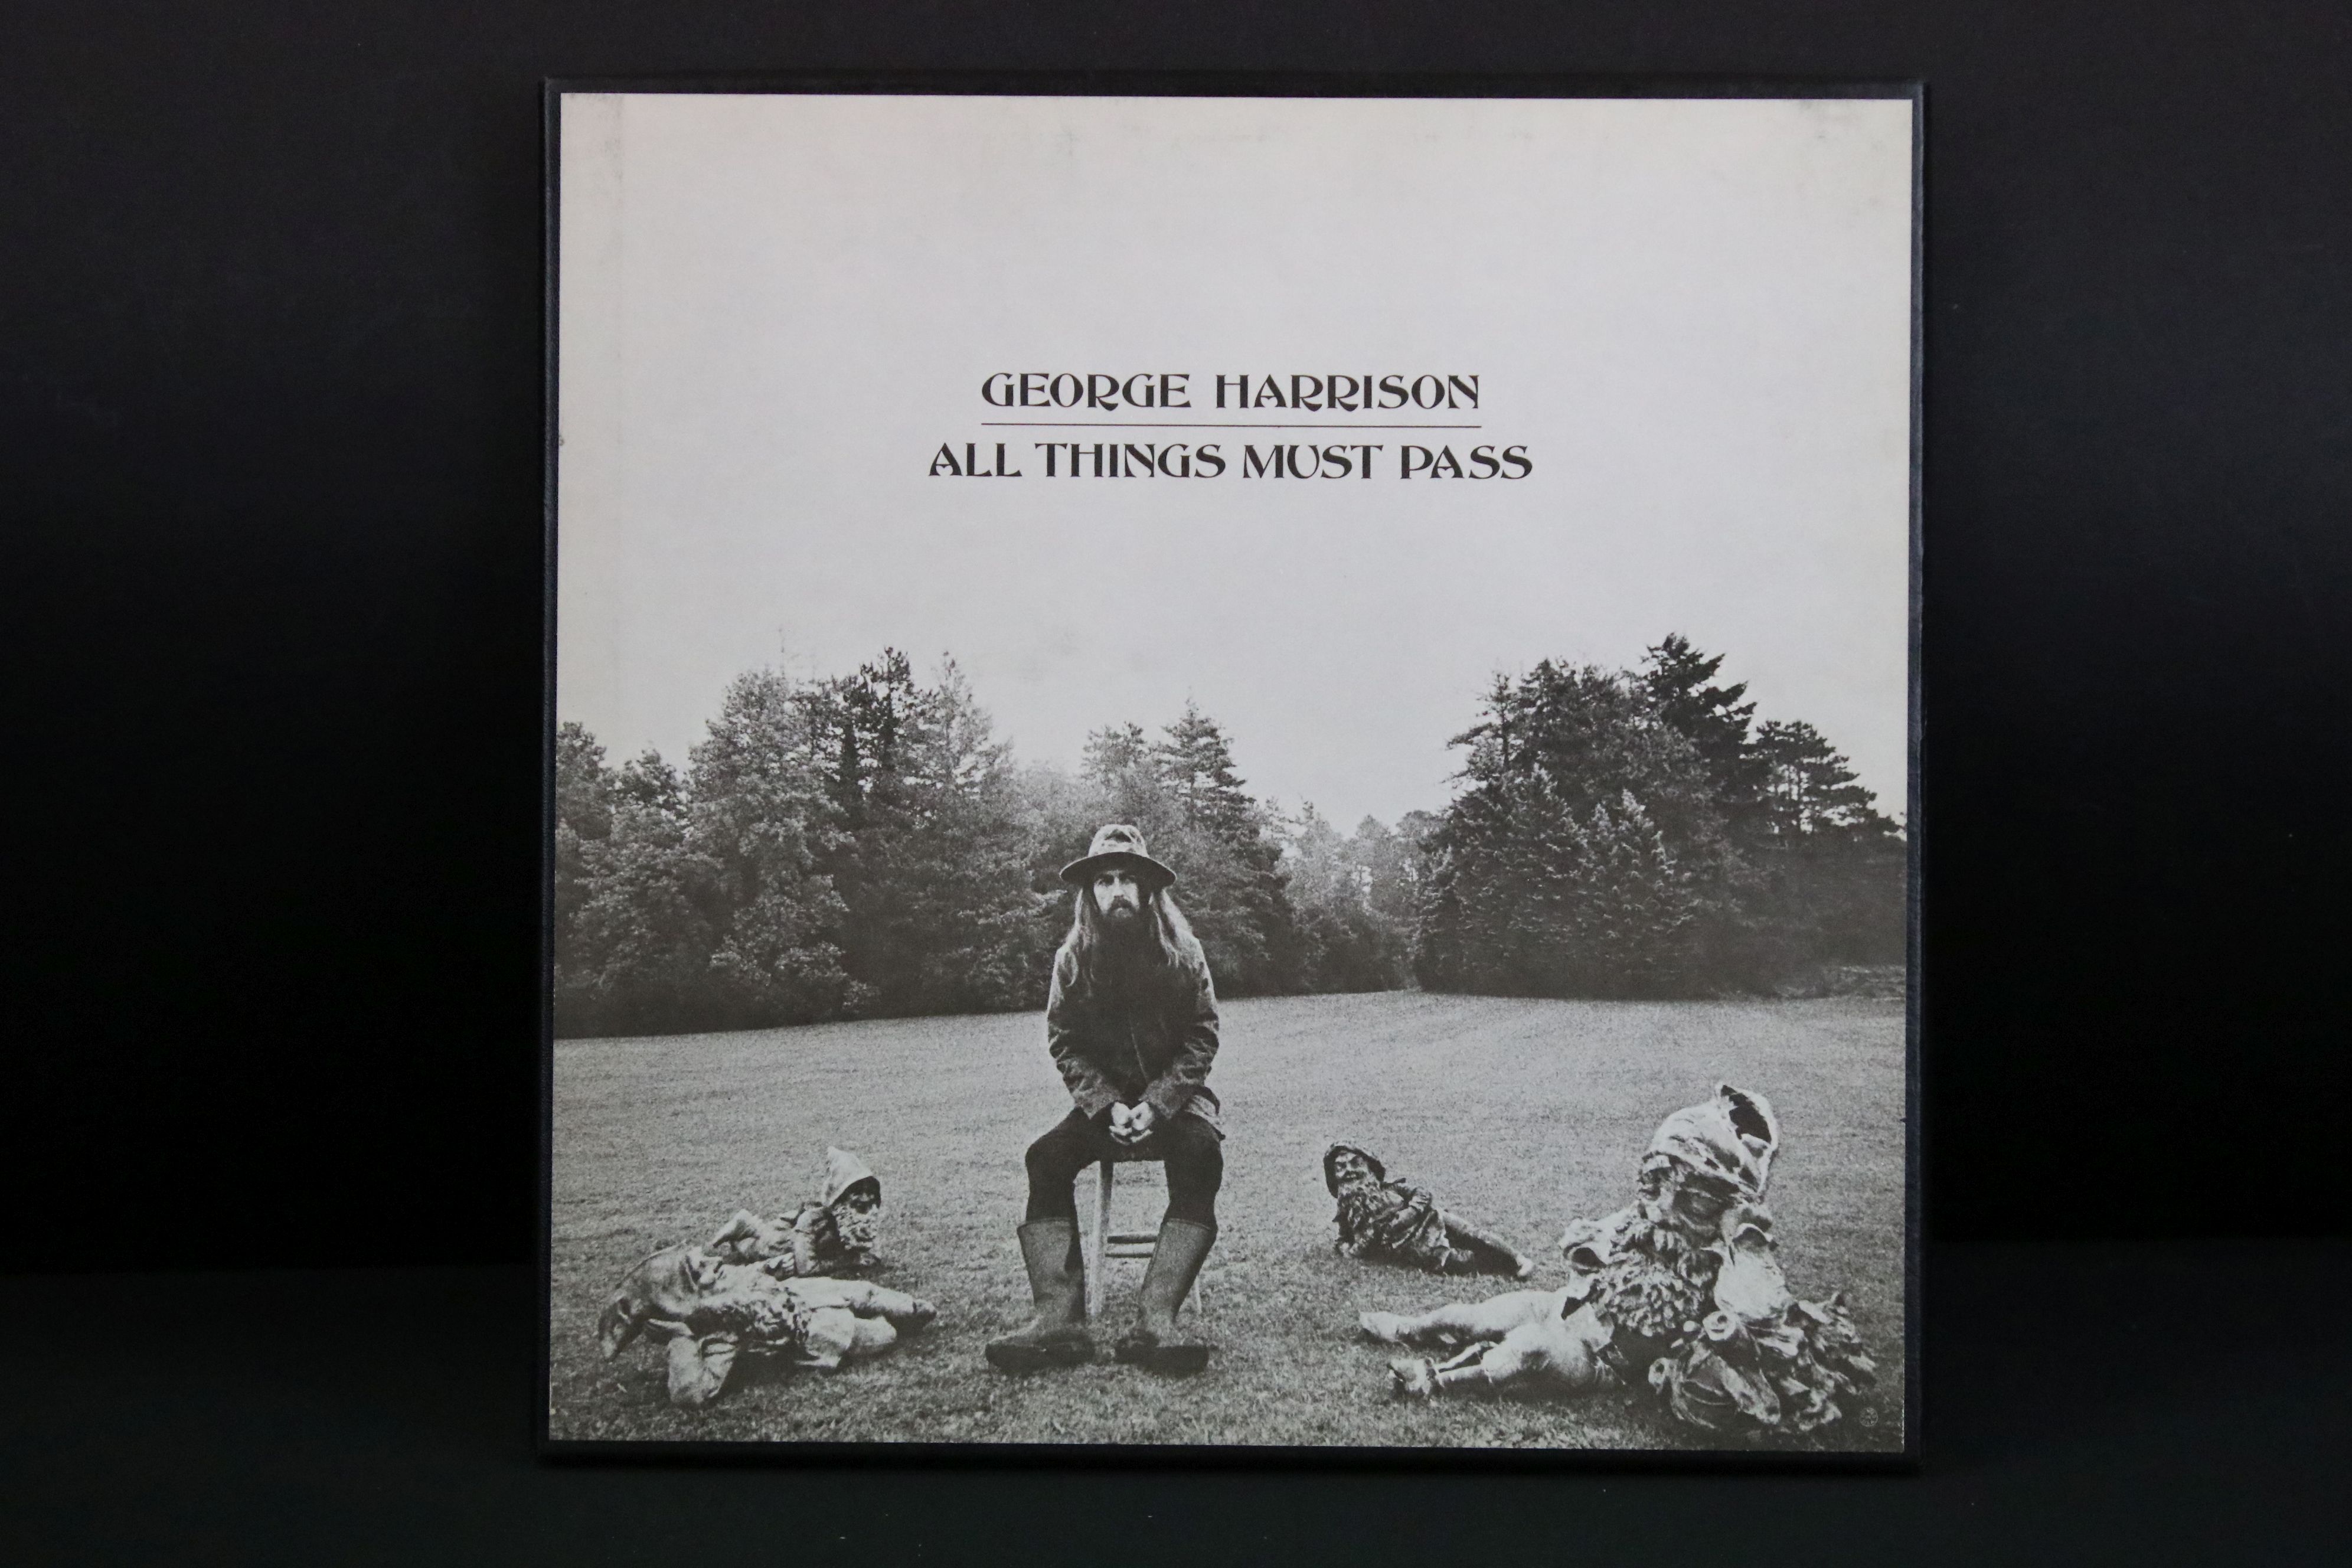 Vinyl - George Harrison All Things Must Pass LP on Apple STCH 639, Eric Clatpon credit to box,